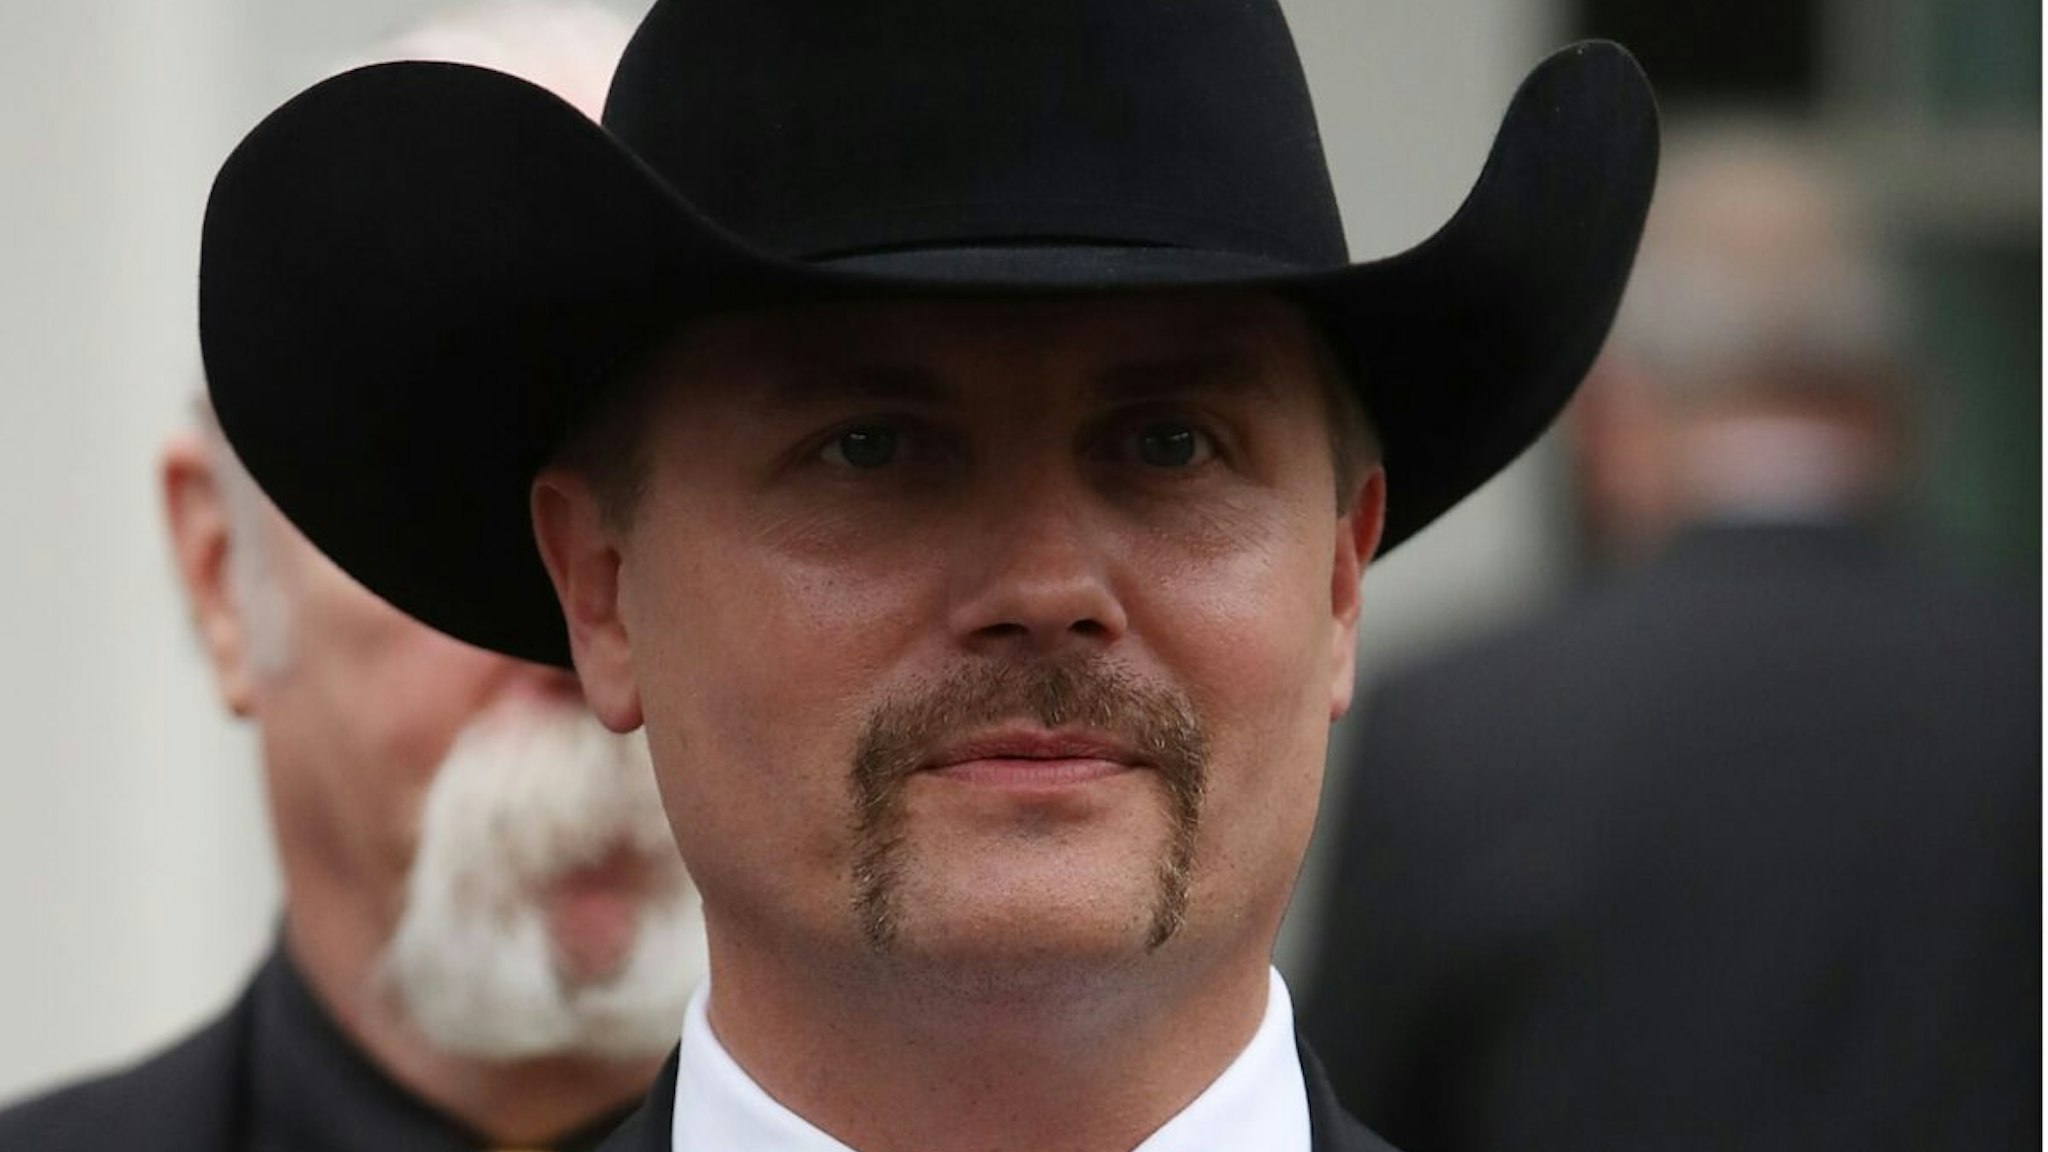 Musician John Rich of Big and Rich speaks to the media in front of the West Wing of the White House after participating in an event where U.S. President Donald Trump signed the H.R. 1551, the ÒOrrin G. Hatch-Bob Goodlatte Music Modernization ActÓ, at the White House on October 11, 2018 in Washington, DC.